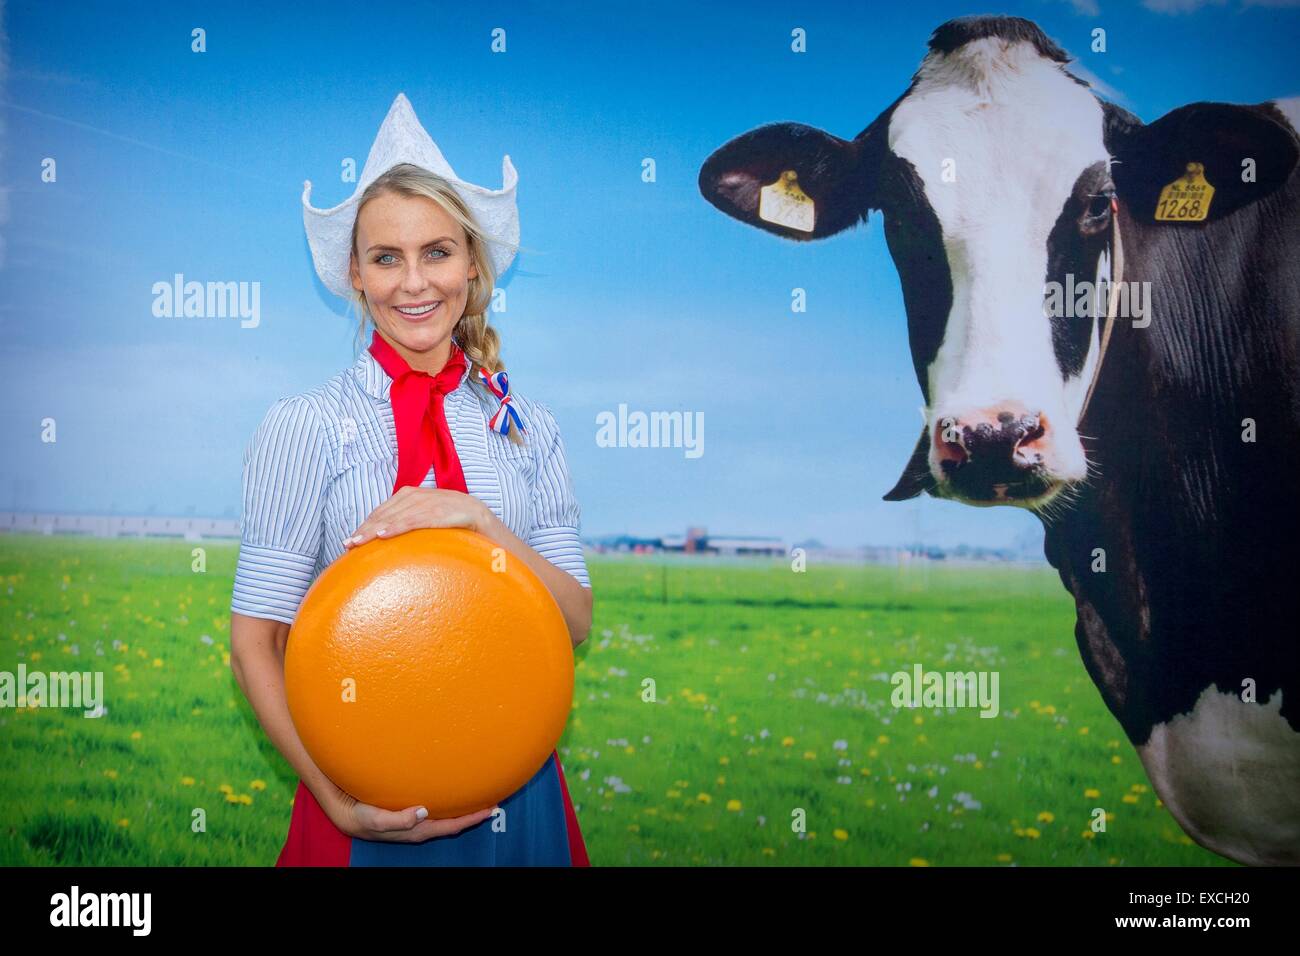 Heerenveen, Netherlands. 08th July, 2015. 'Frau Antje' (Mendy Smits) at the cheese Factory Royal A Ware in Heerenveen, Netherlands, 08 July 2015. Photo: Patrick van Katwijk POINT DE VUE OUT - NO WIRE SERVICE -/dpa/Alamy Live News Stock Photo